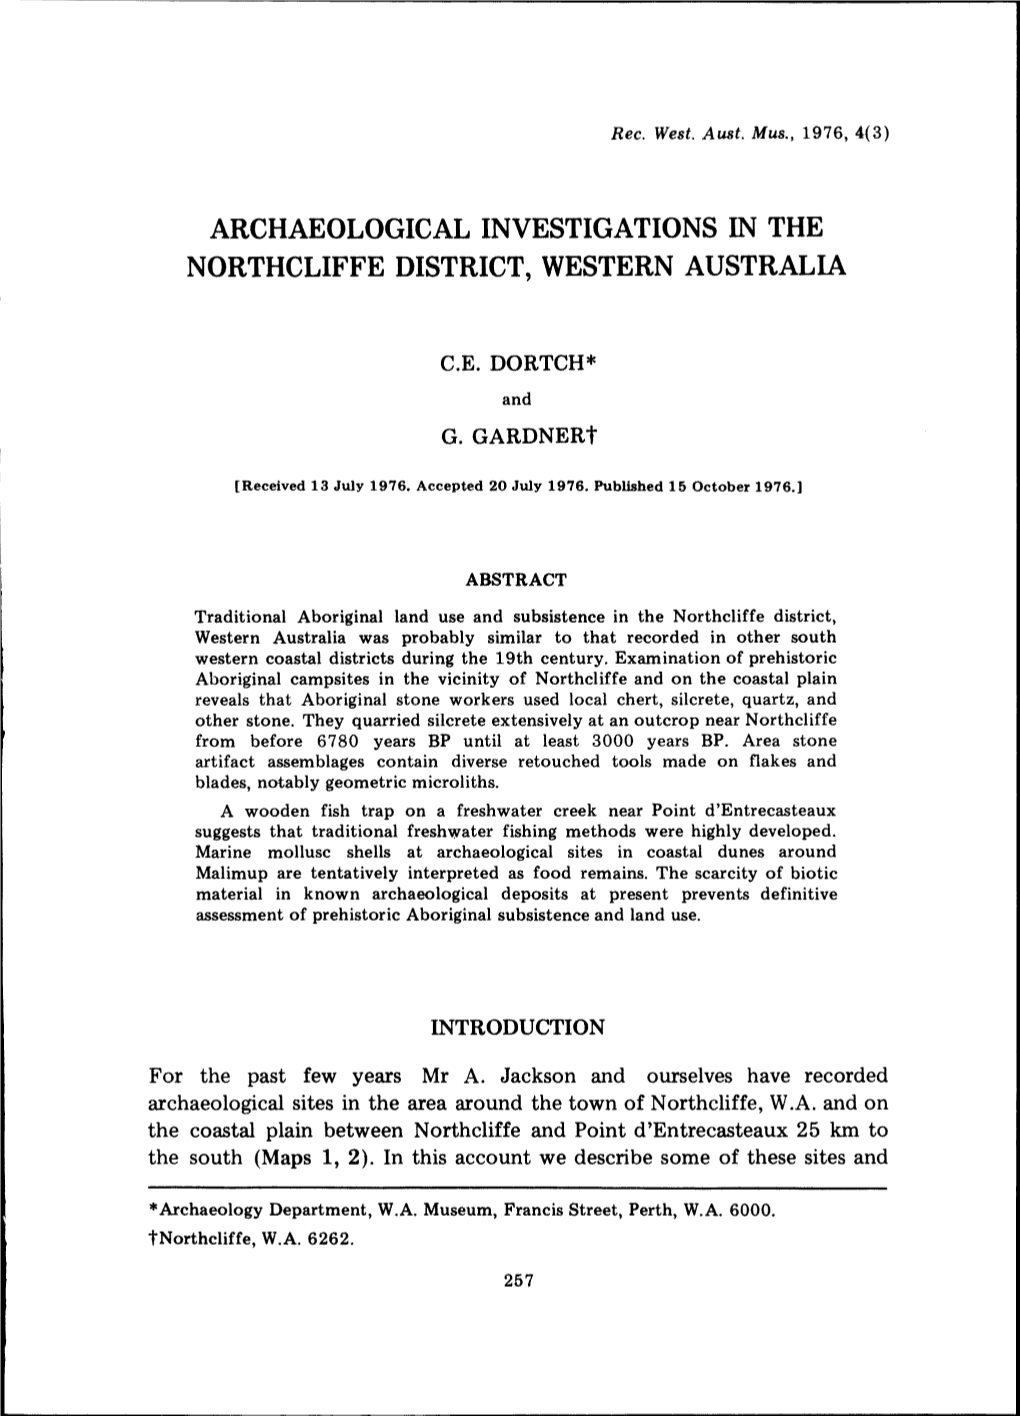 Archaeological Investigations in the Northcliffe District, Western Australia